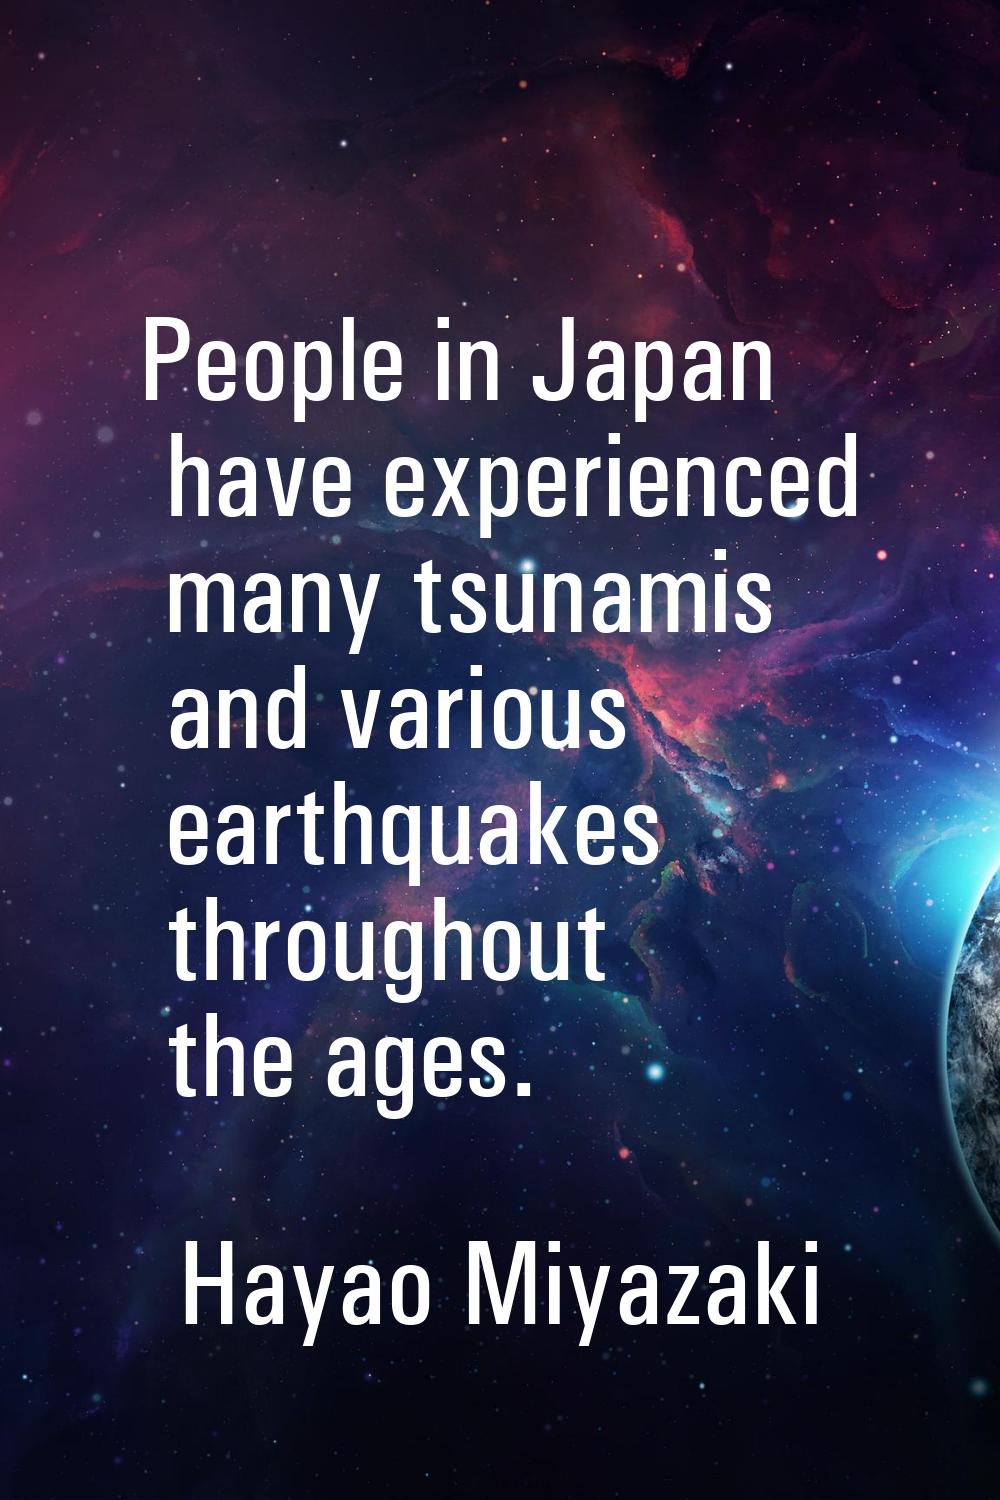 People in Japan have experienced many tsunamis and various earthquakes throughout the ages.